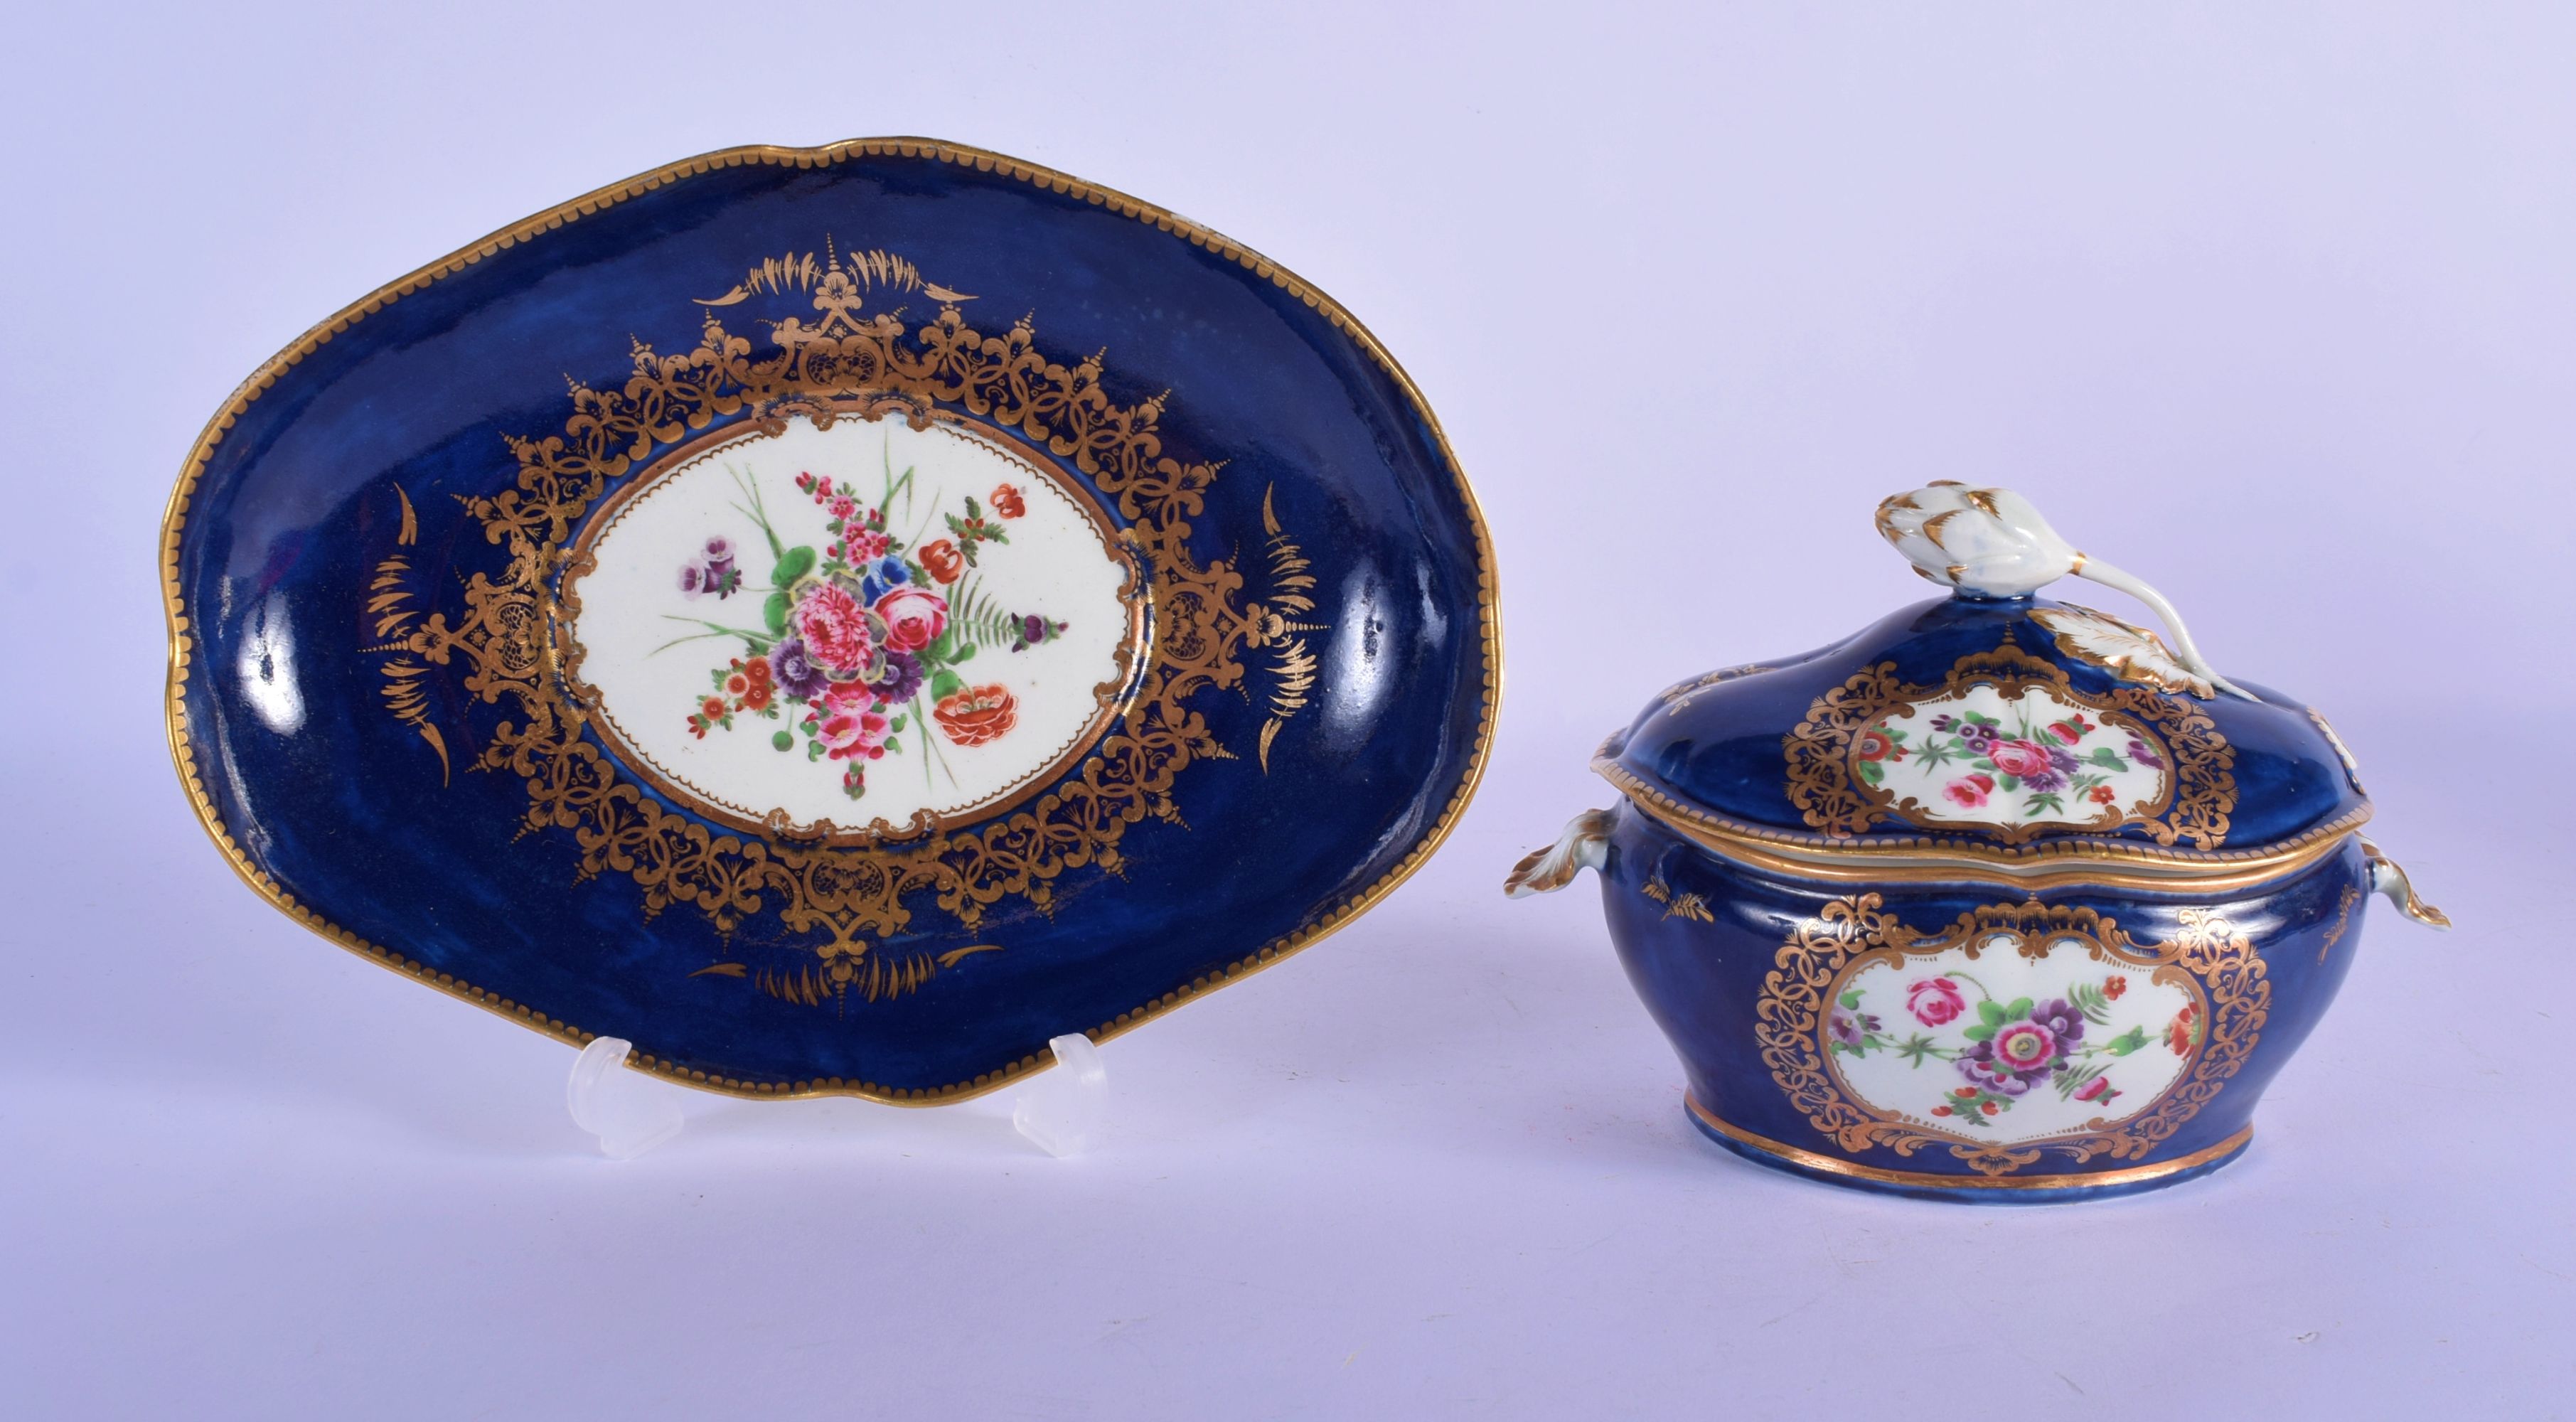 Worcester sauce tureen and cover with stand c.1770-75, the oval form painted with panels of polychro